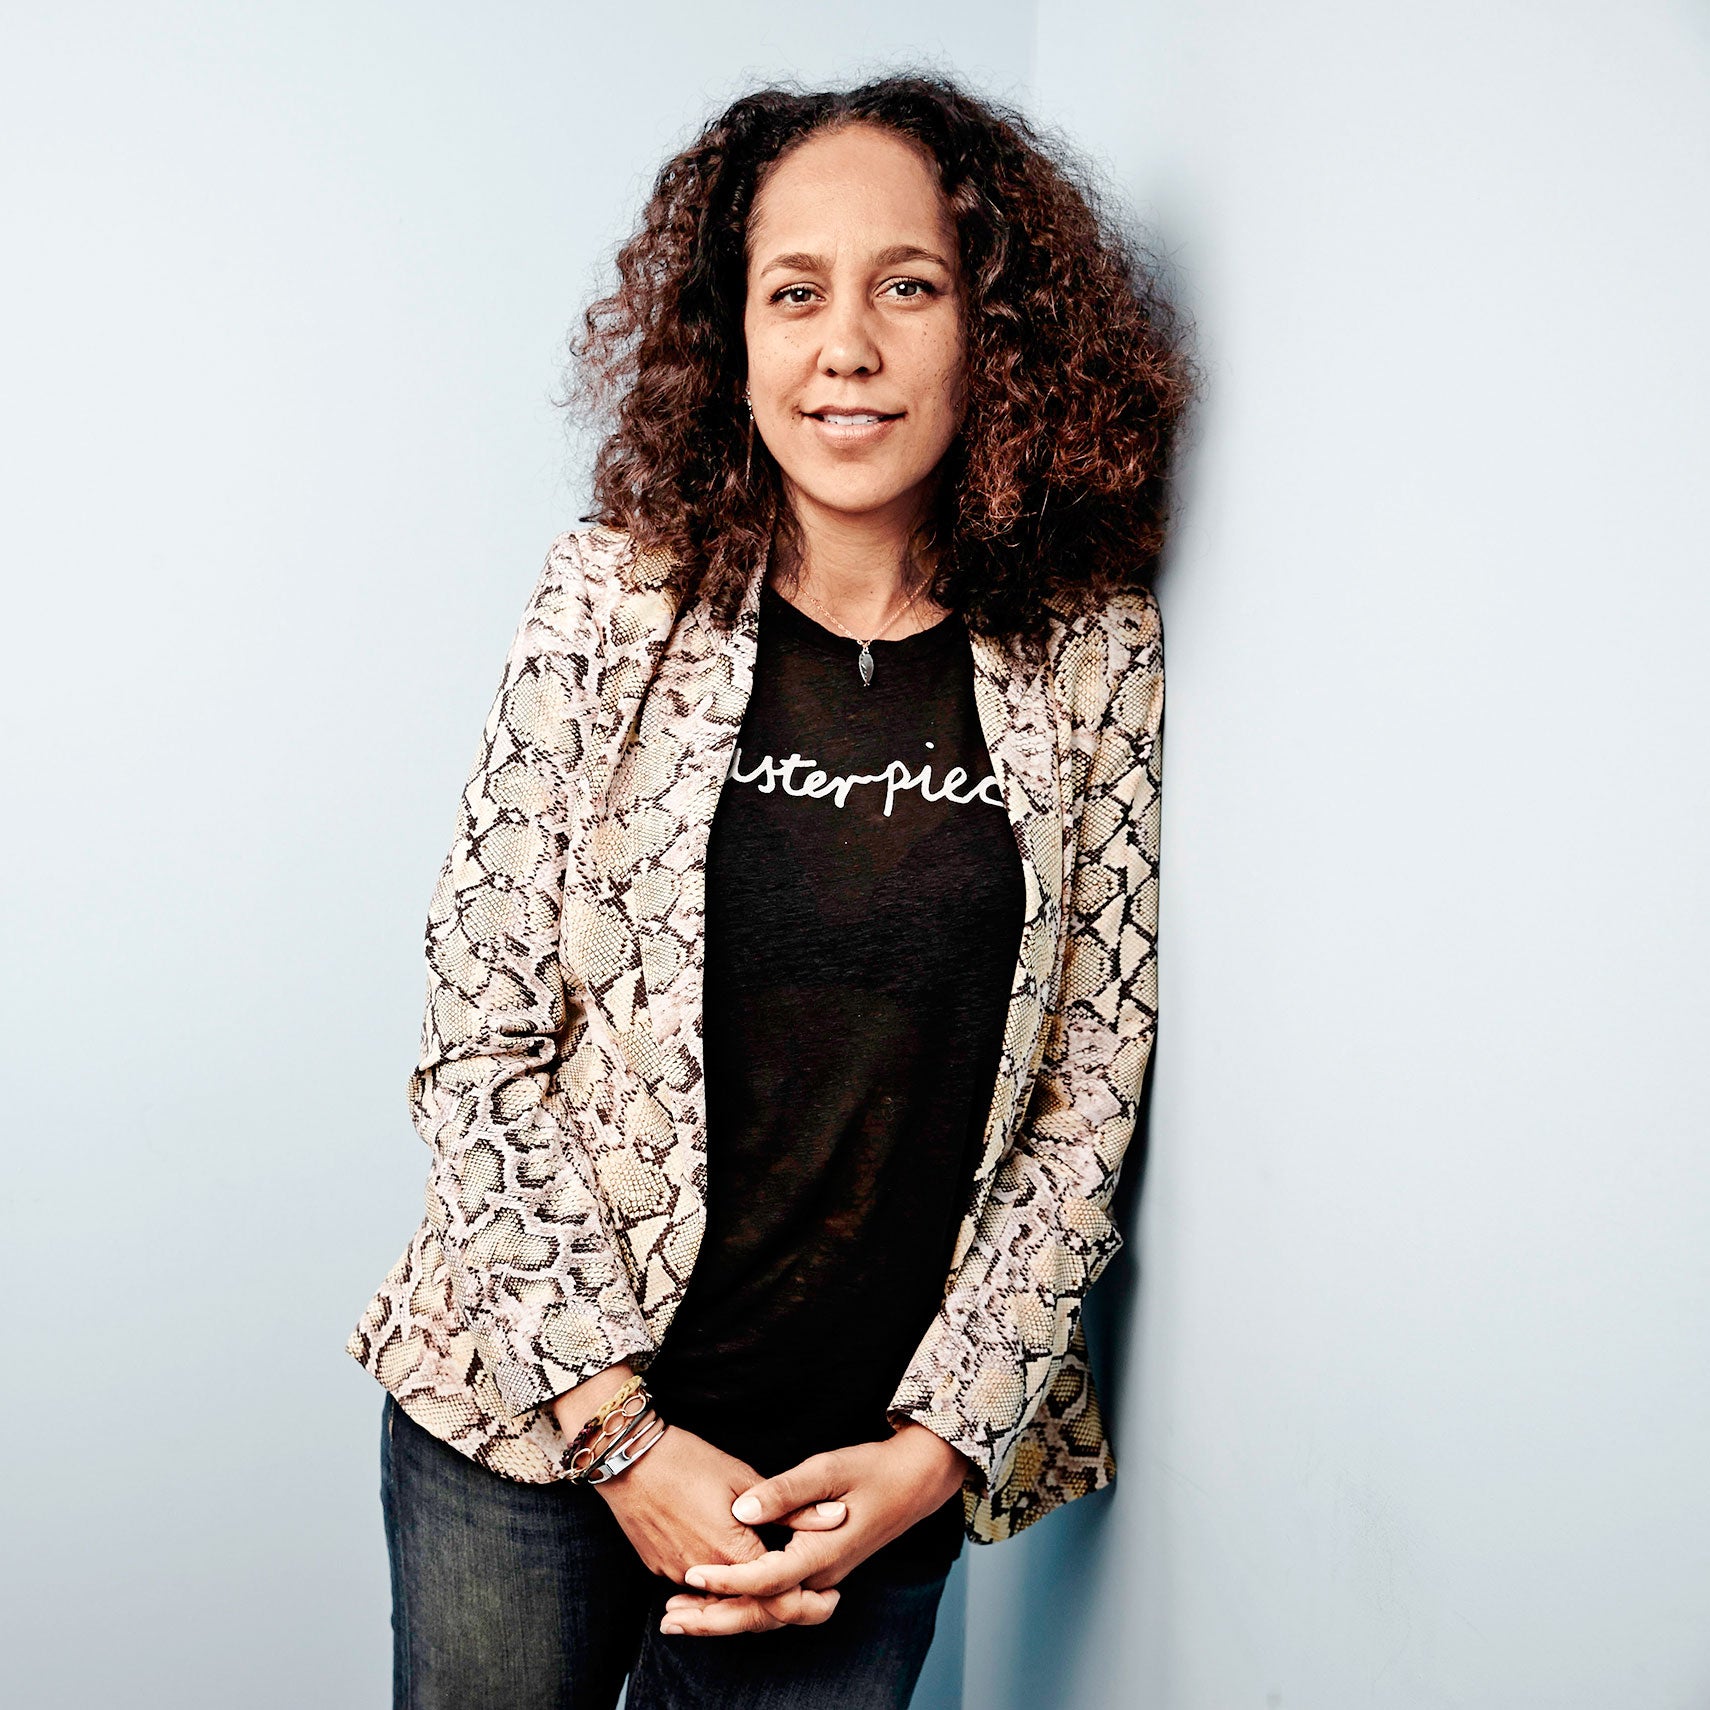 Sony Taps Gina Prince-Bythewood To Helm ‘Spider-Man’ Spin-Off